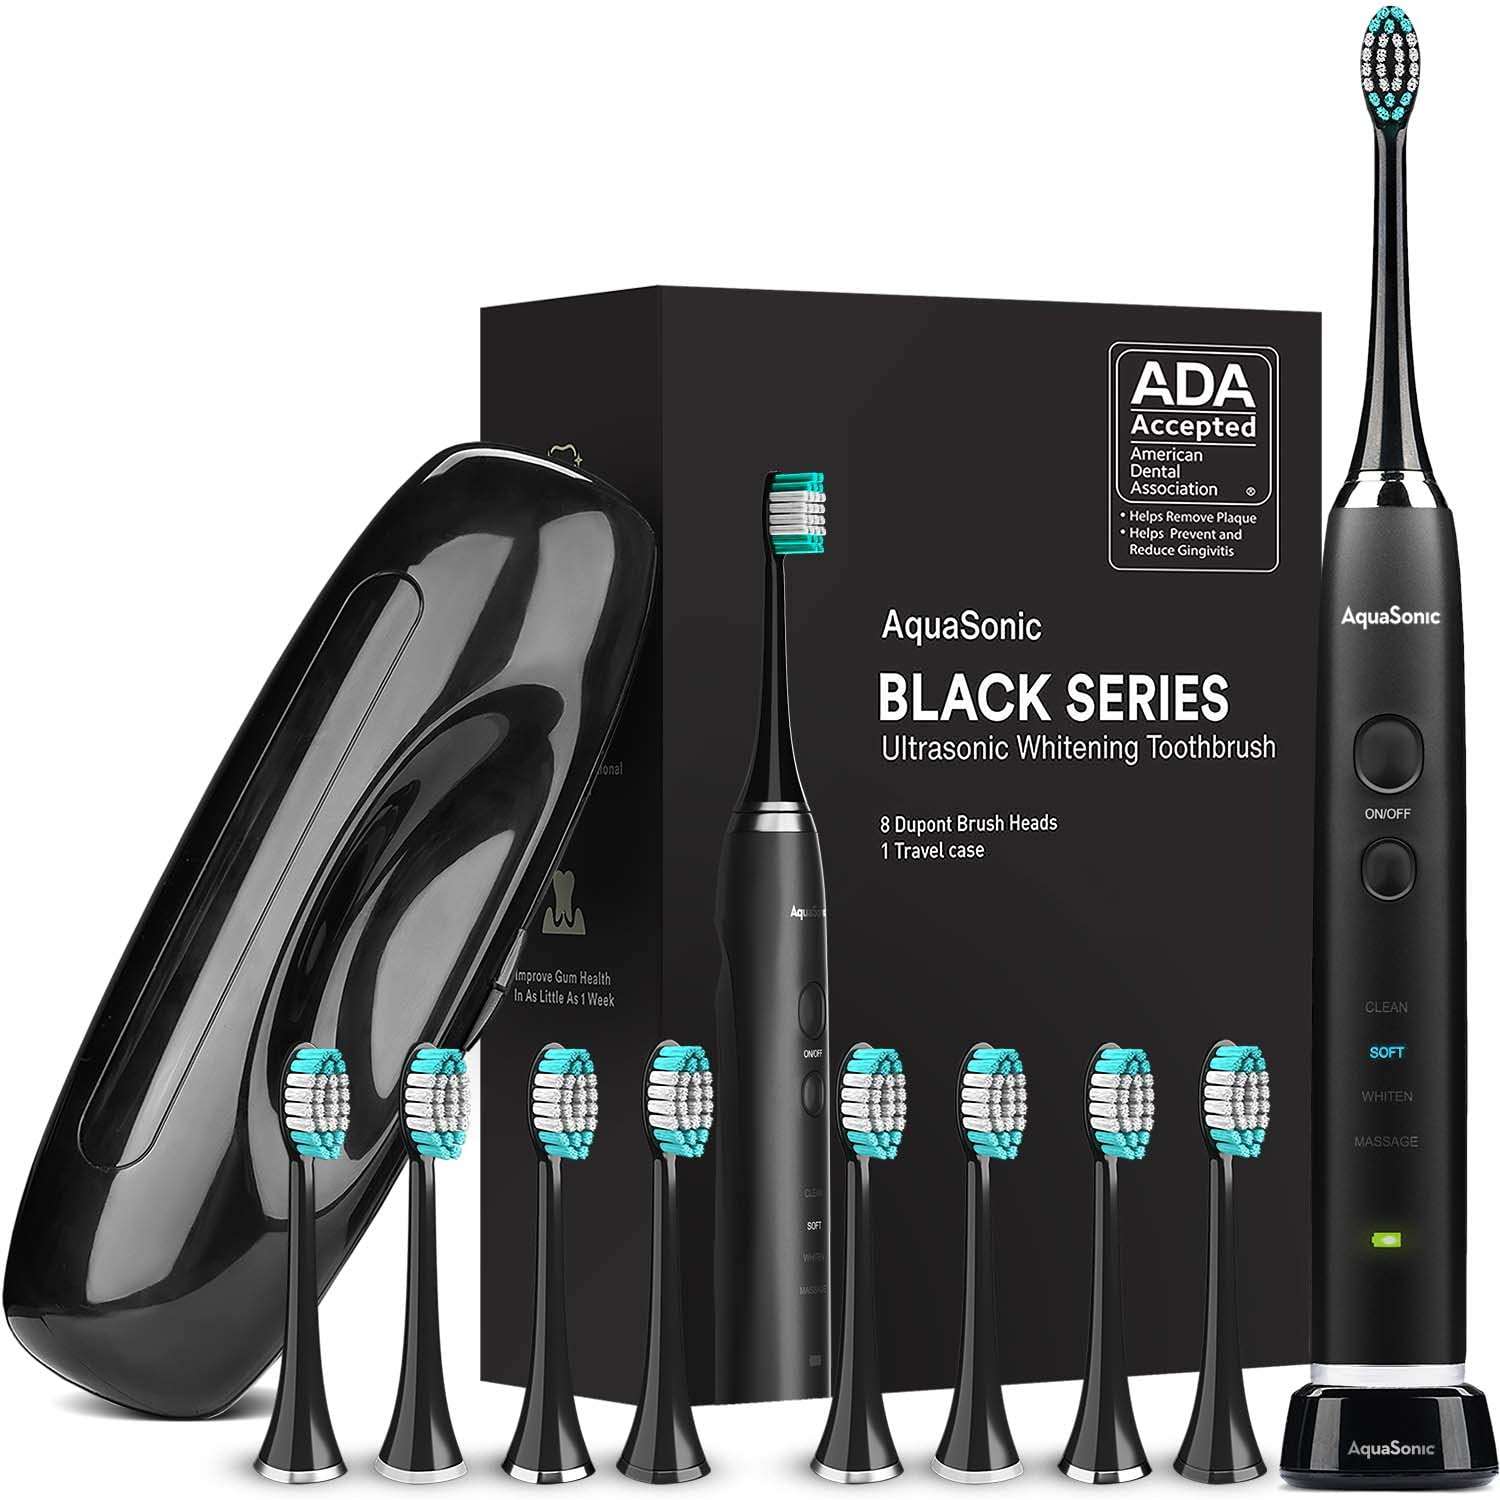 Amazon.com: AquaSonic Black Series Ultra Whitening Toothbrush – ADA Accepted Electric Toothbrush - 8 Brush Heads & Travel Case - Ultra Sonic Motor & Wireless Charging - 4 Modes w Smart Timer -